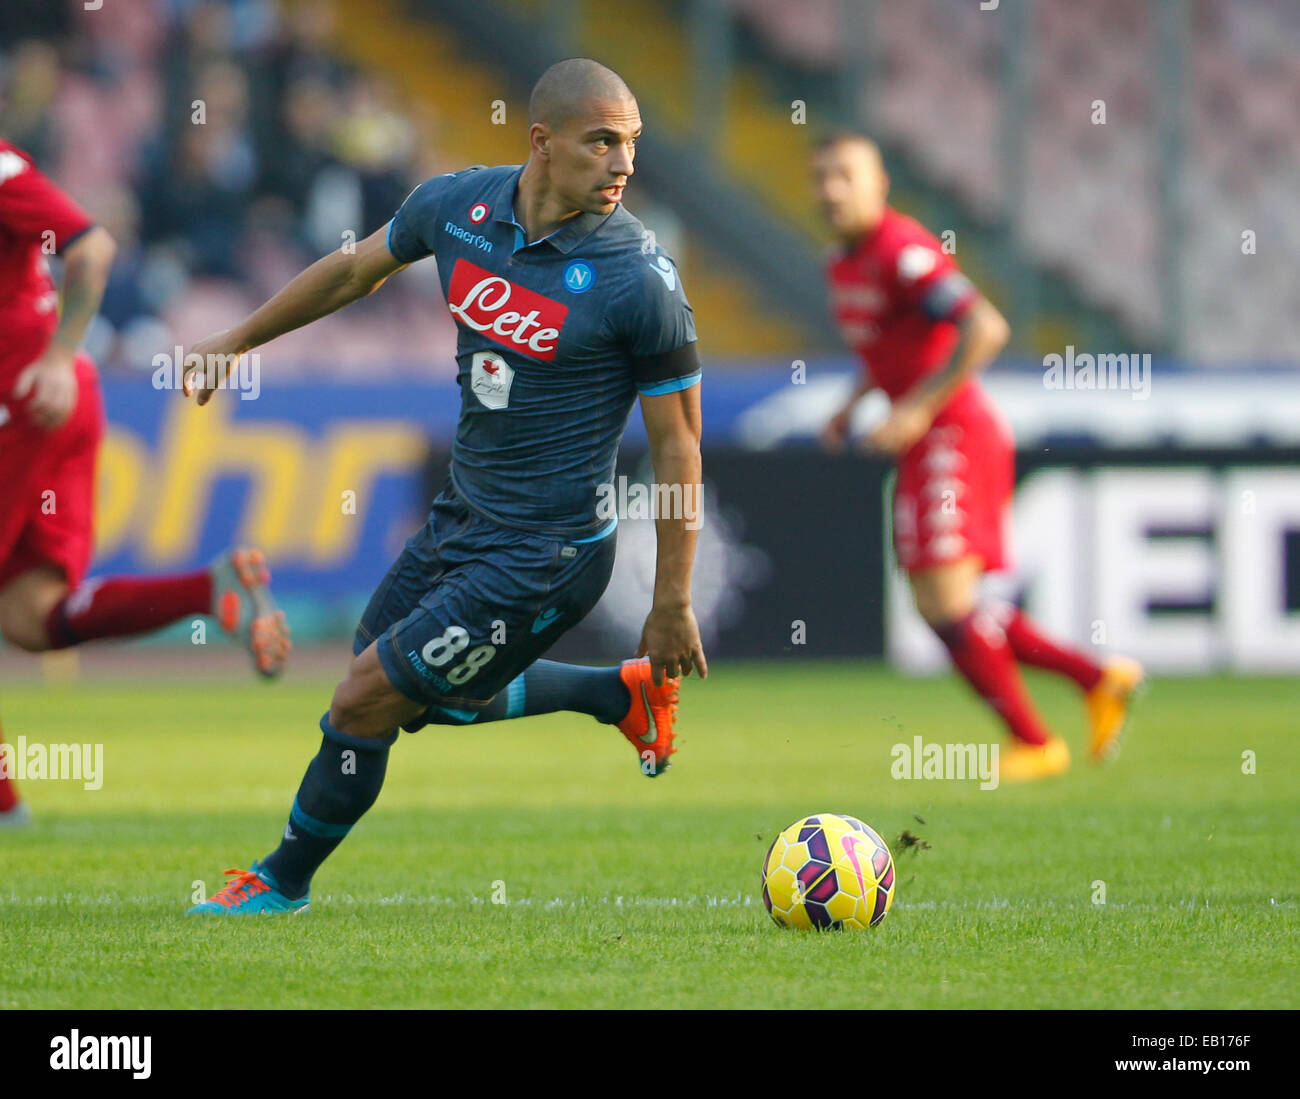 Gokhan Inler in action during the Italian Serie A soccer match between SSC Napoli and Cagliari at San Paolo stadium in Naples. © Ciro De Luca/Pacific Press/Alamy Live News Stock Photo